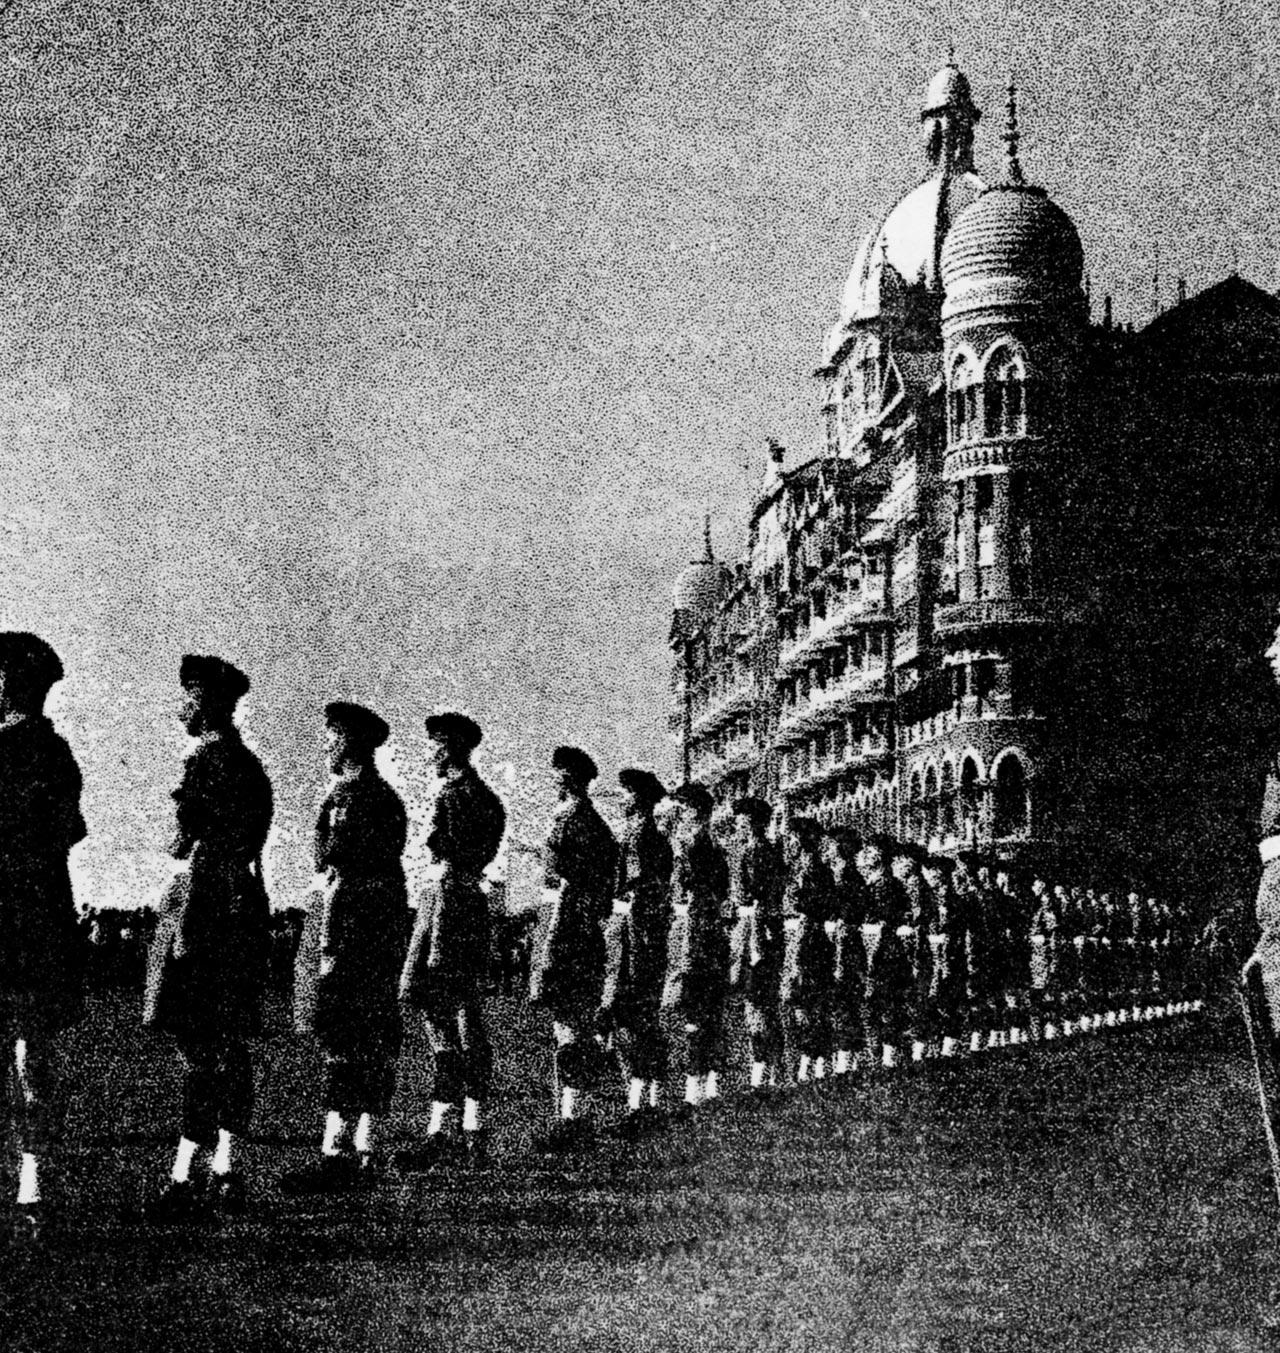 As the last British troops prepare to depart from India, they line up next to the Taj. Pics courtesy/The Taj Mahal Palace and Tower